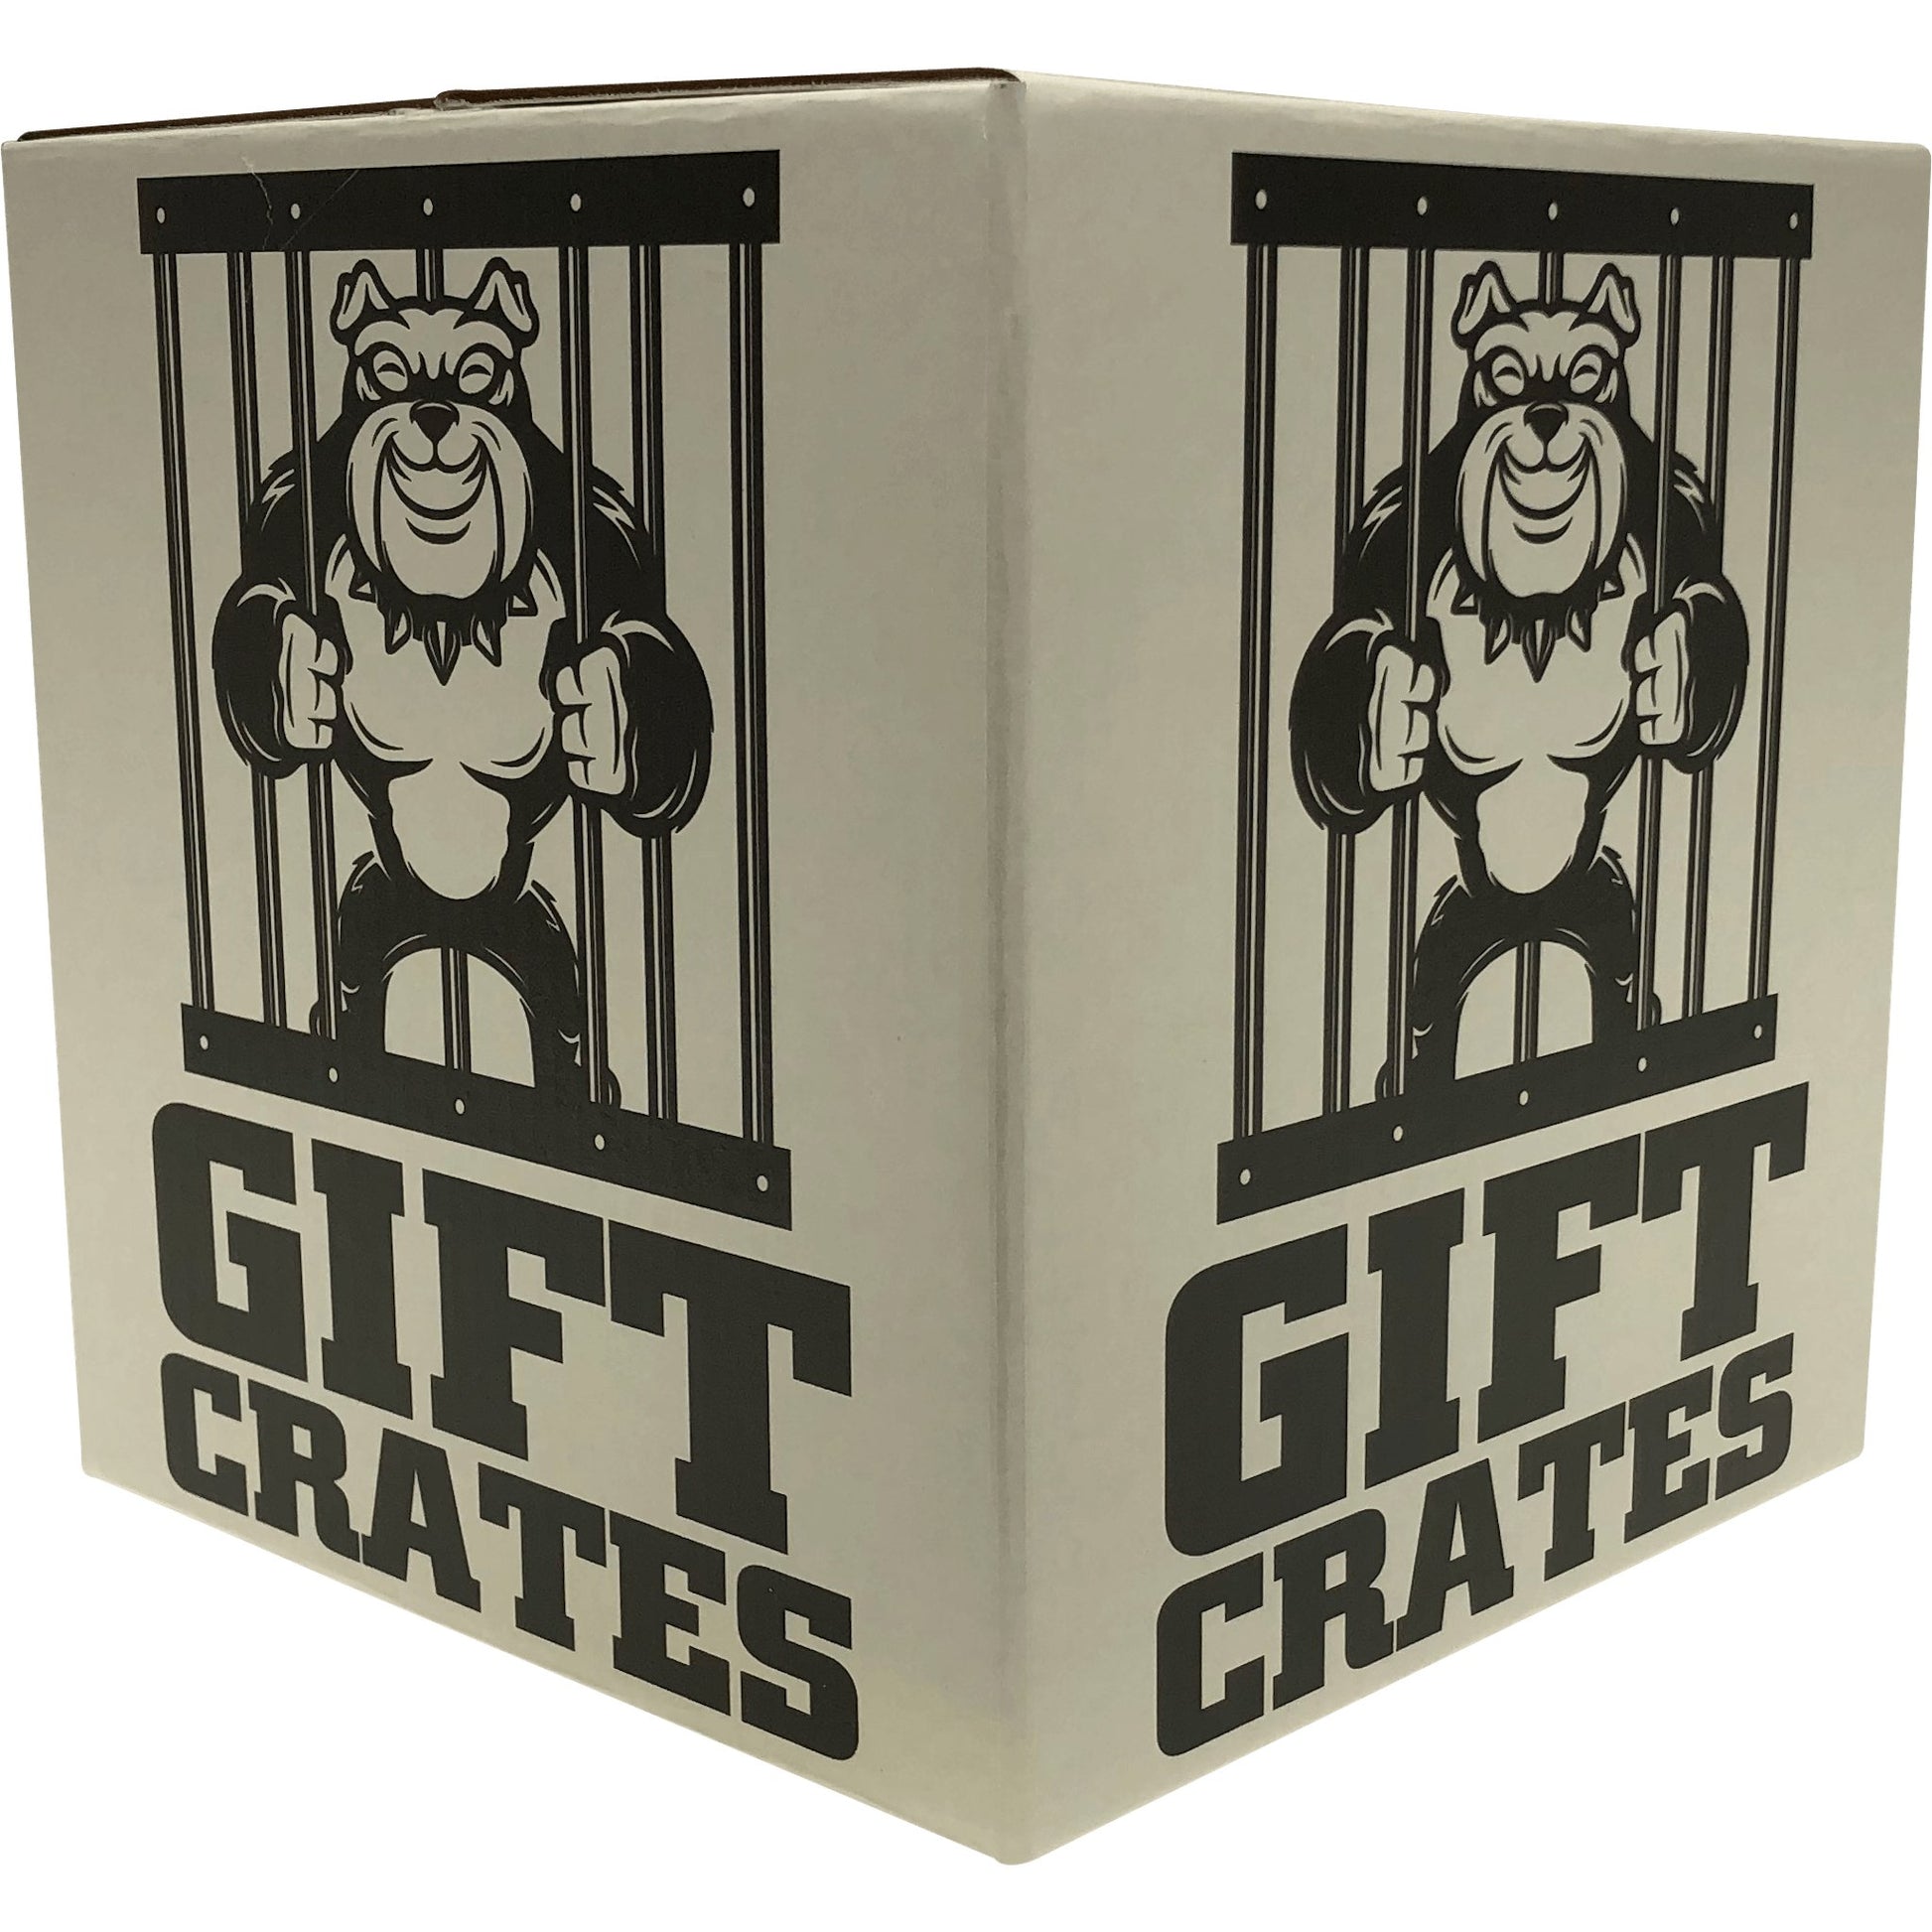 Old School Crate - Gift Crates